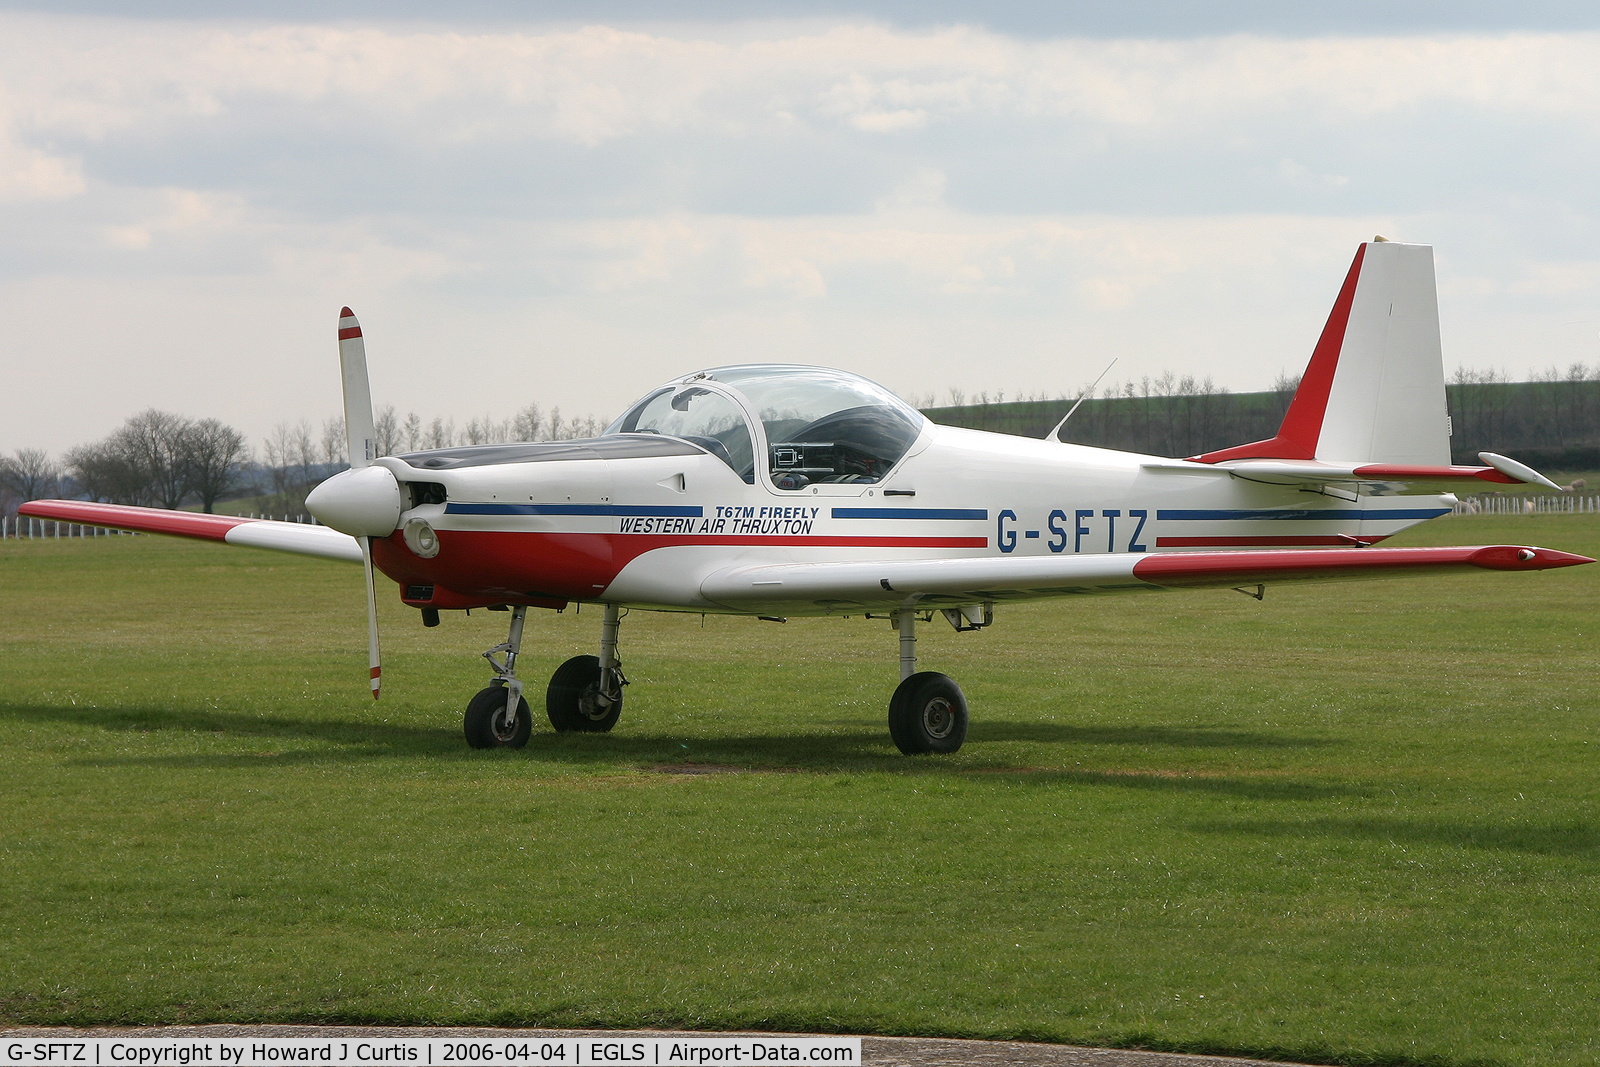 G-SFTZ, 1983 Slingsby T-67M Firefly C/N 2000, Privately owned.